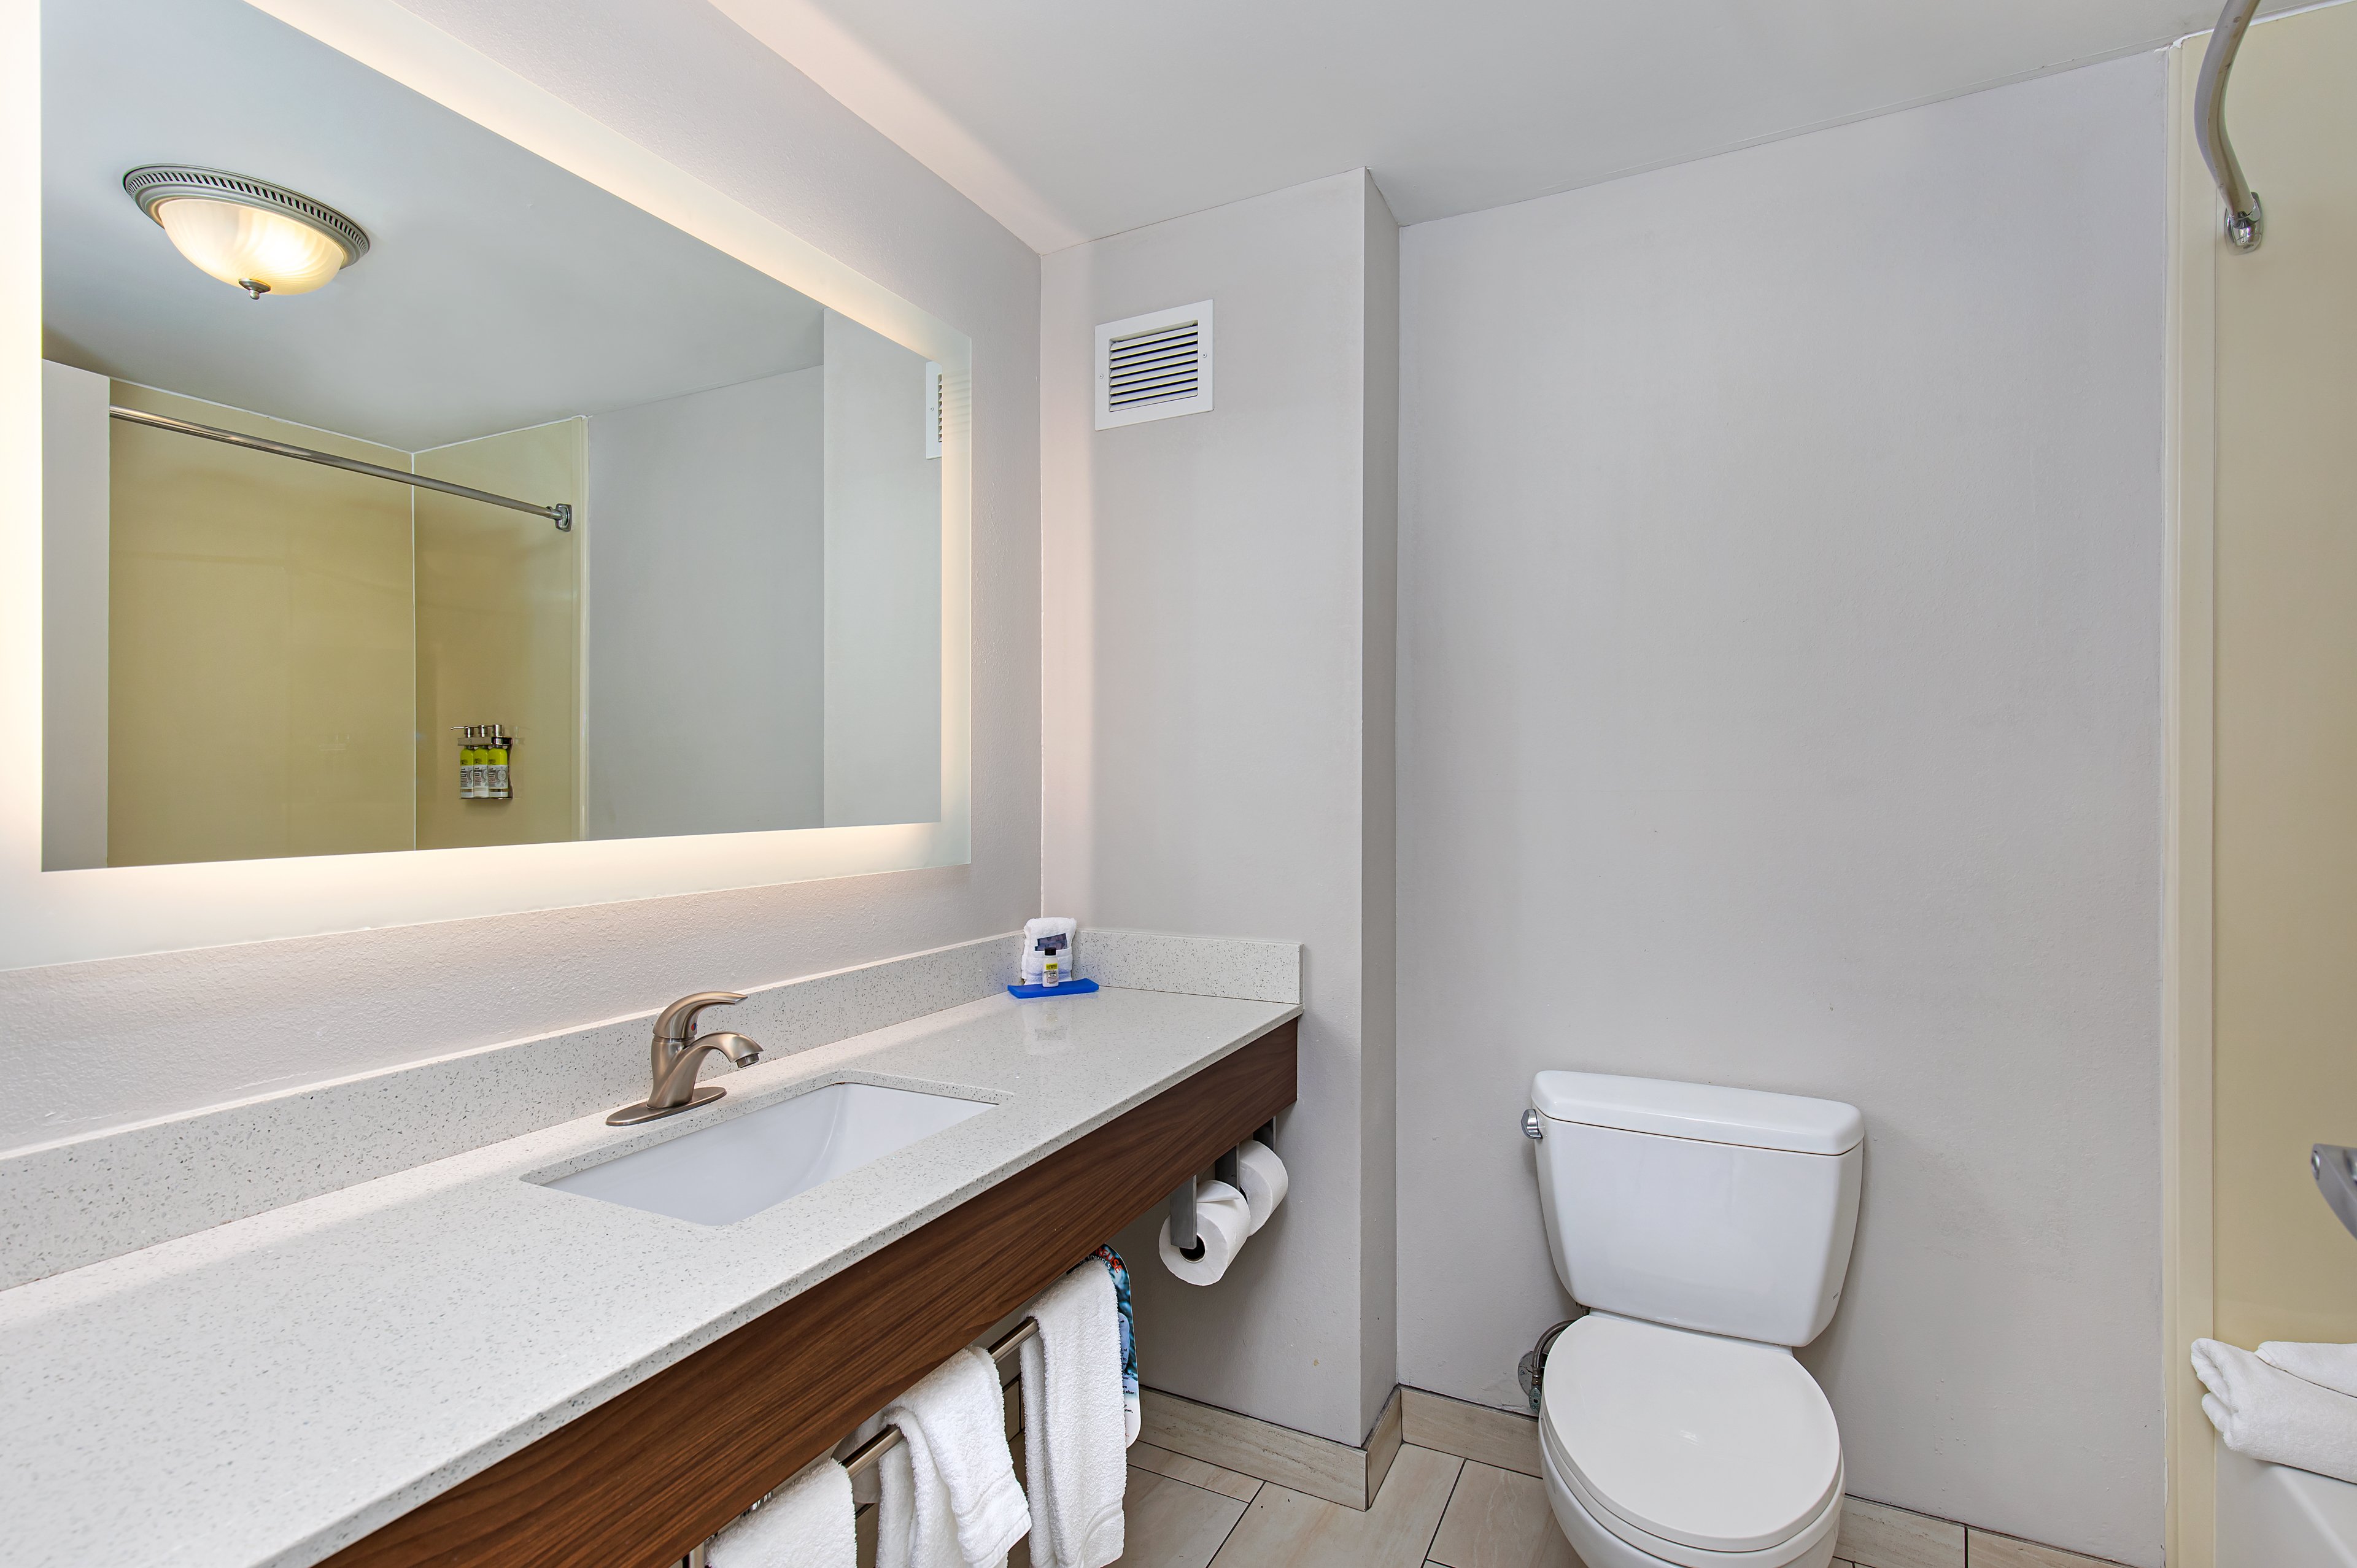 Bathroom has large lighted mirror and plenty of counter space!